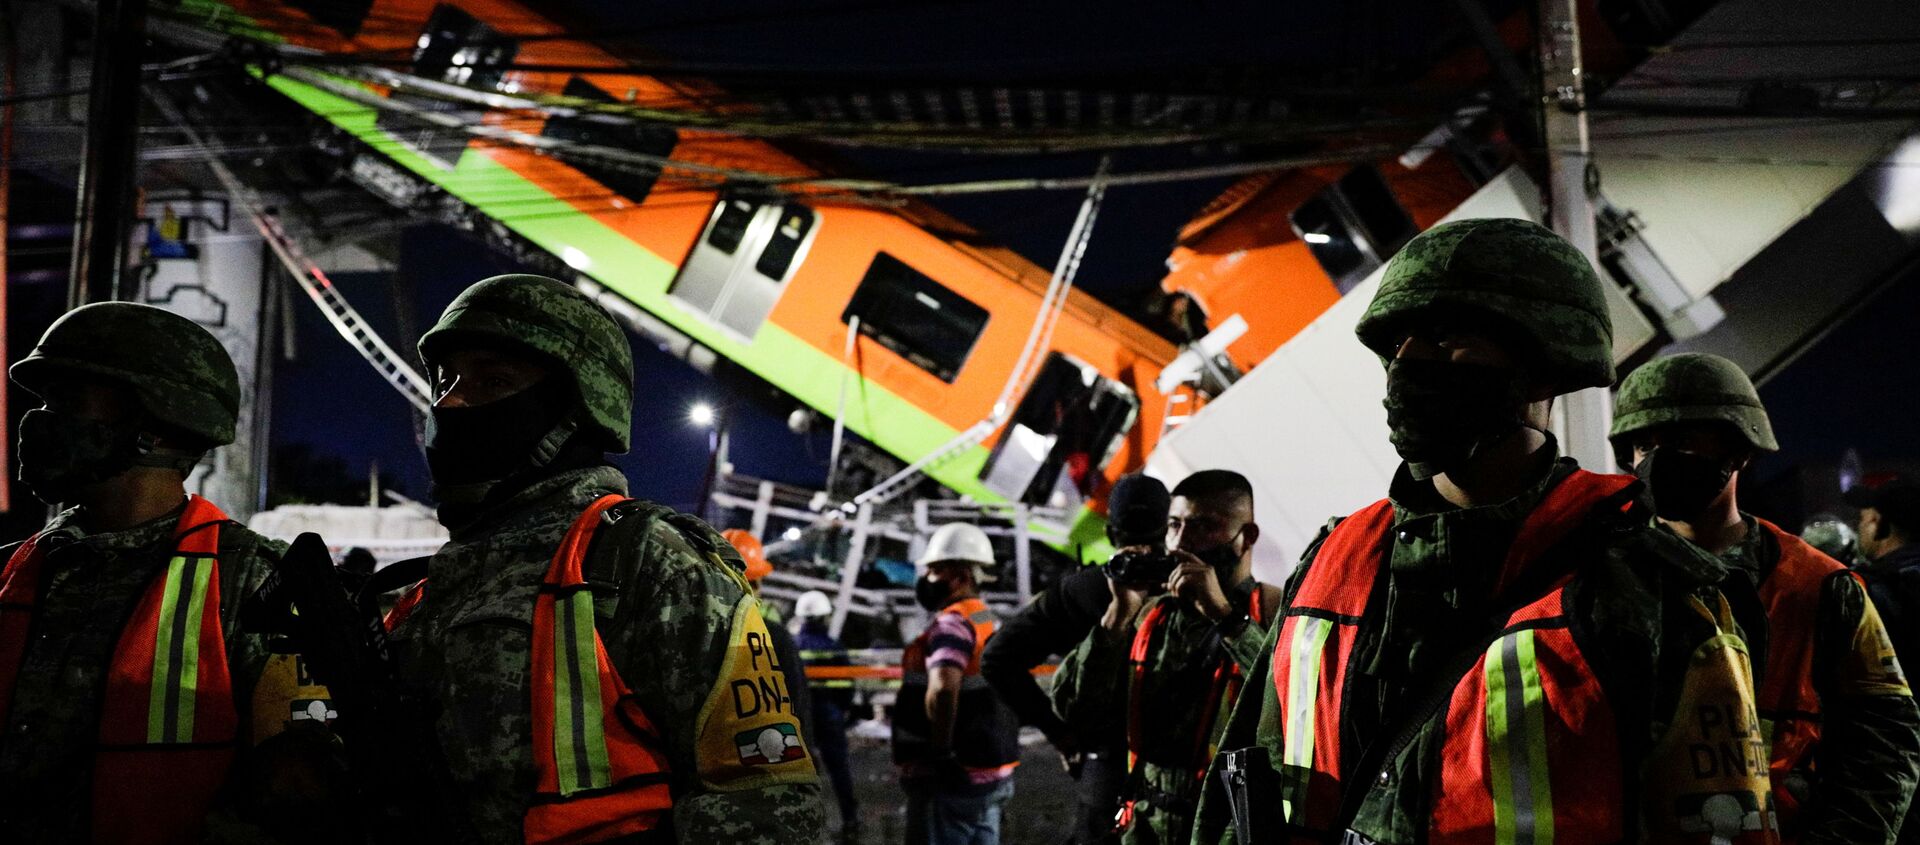 Mexico City rail overpass collapses - 俄羅斯衛星通訊社, 1920, 04.05.2021